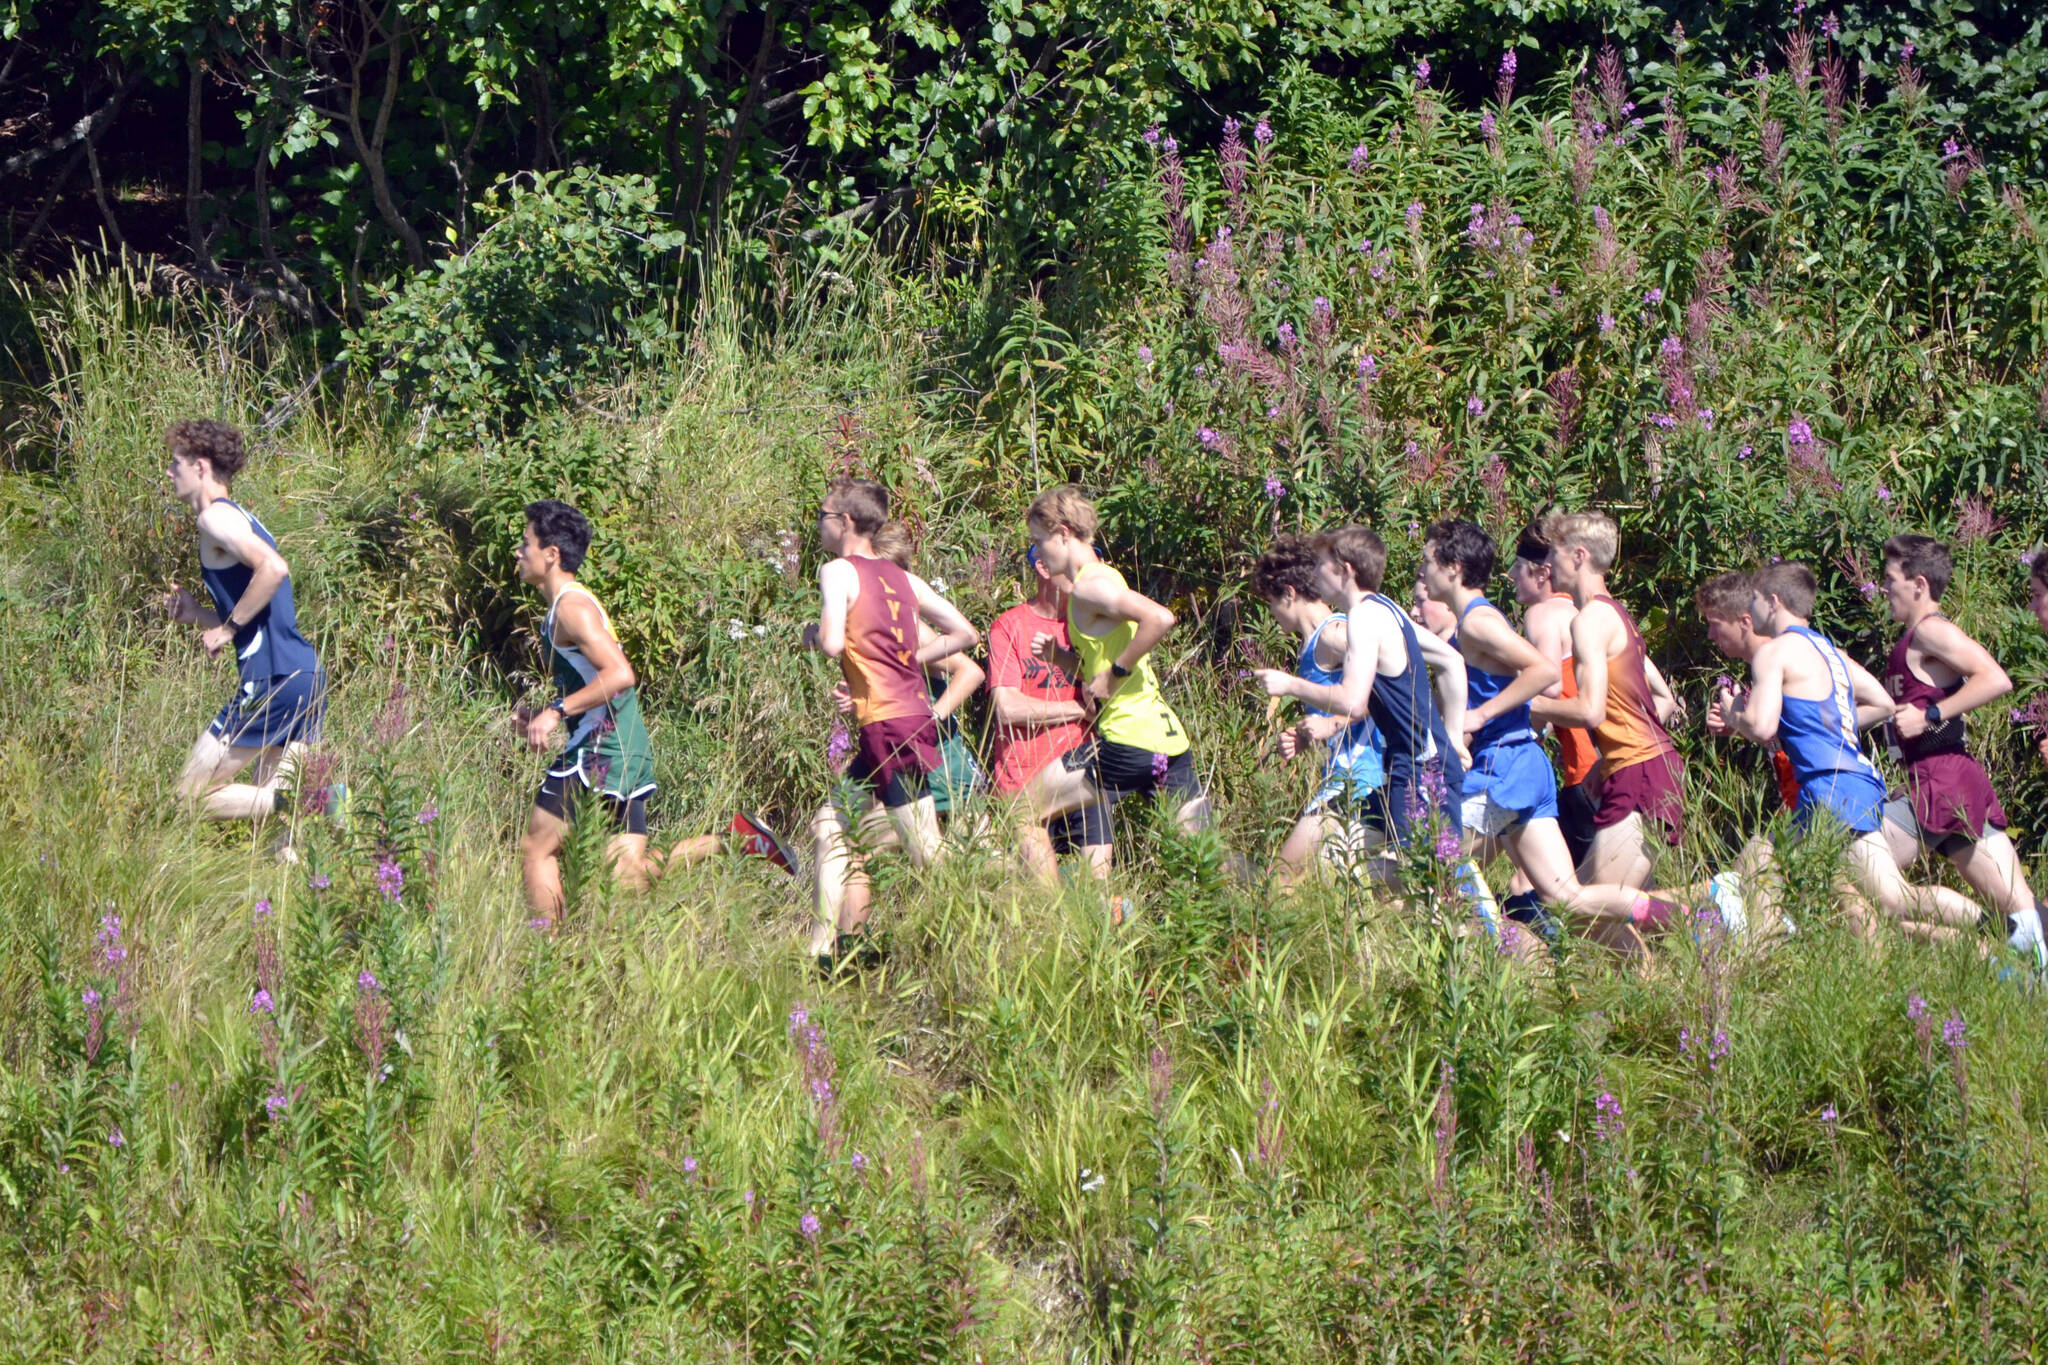 Runners participate in boys varsity race at the Ted McKenney XC Invitational on Saturday, Aug. 21, 2021, at Tsalteshi Trails just outside of Soldotna, Alaska. The trails recently reported incidents of vandalism and theft. (Photo by Jeff Helminiak/Peninsula Clarion)